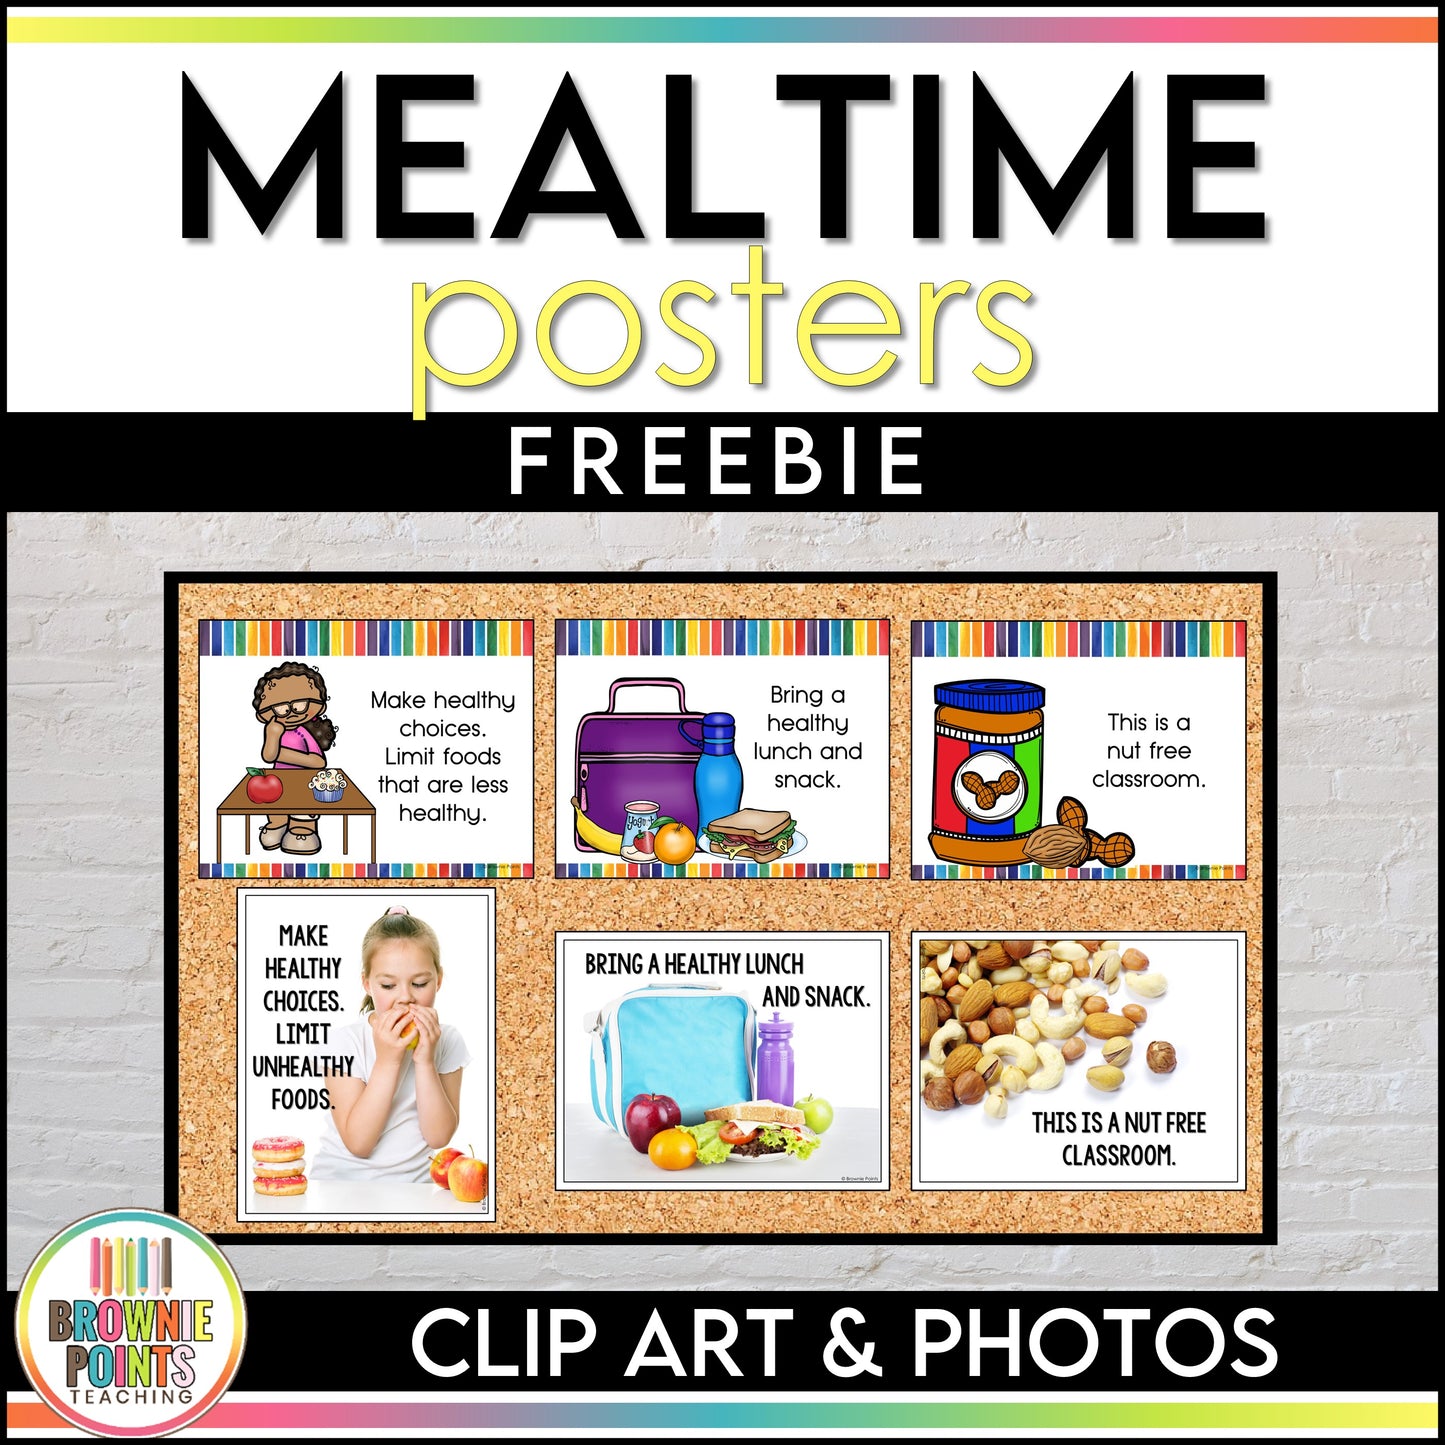 Healthy Eating - Mealtime Posters